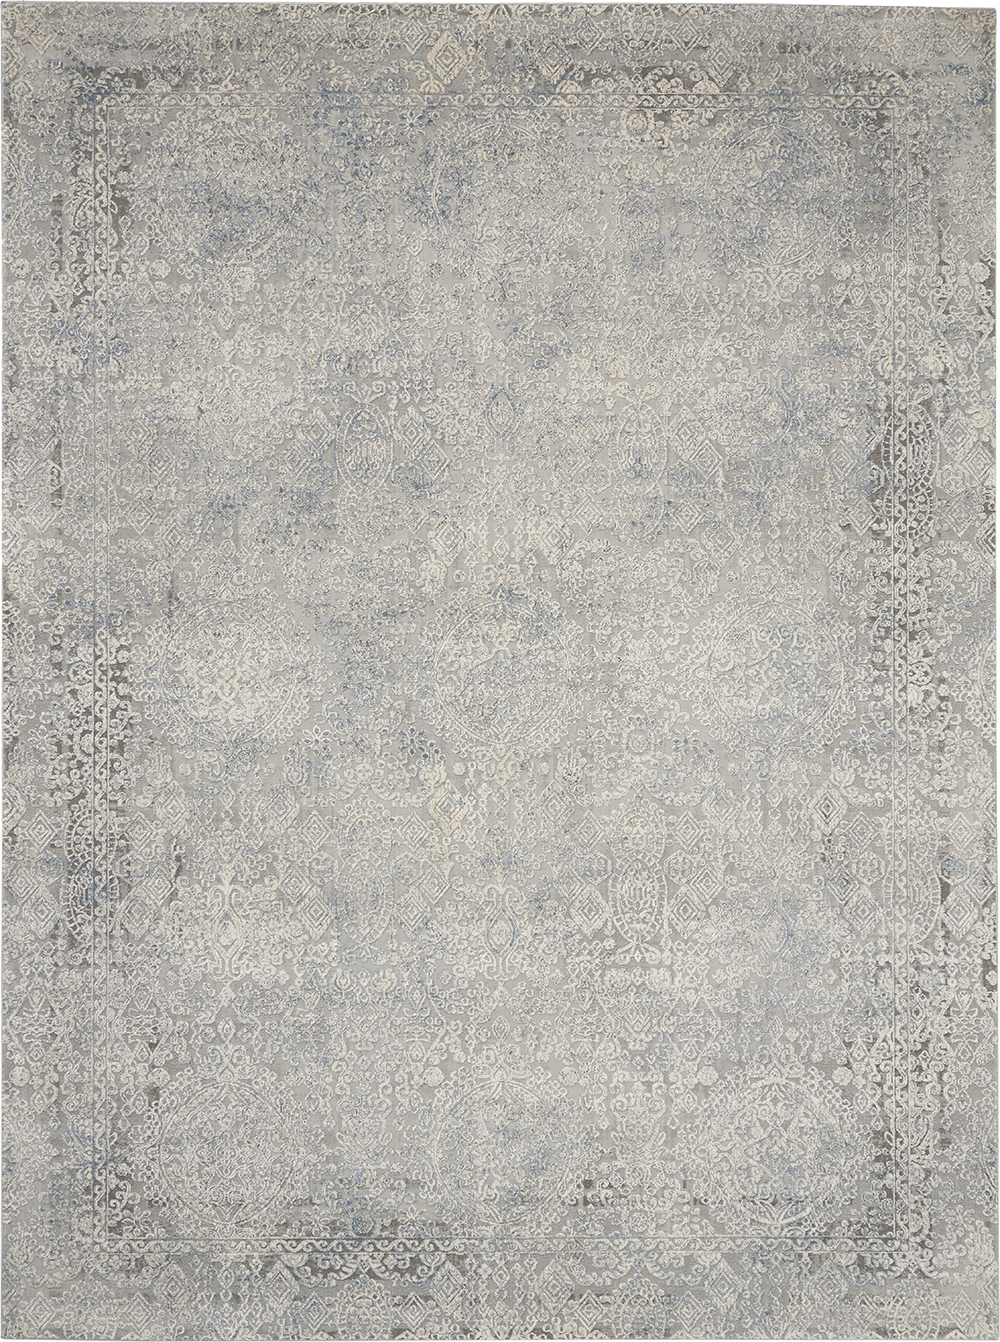 Nourison Rugs - Rustic Textures Rectanglular RUS09 Rug in Ivory / Light Blue - 3.2m x 2.4m